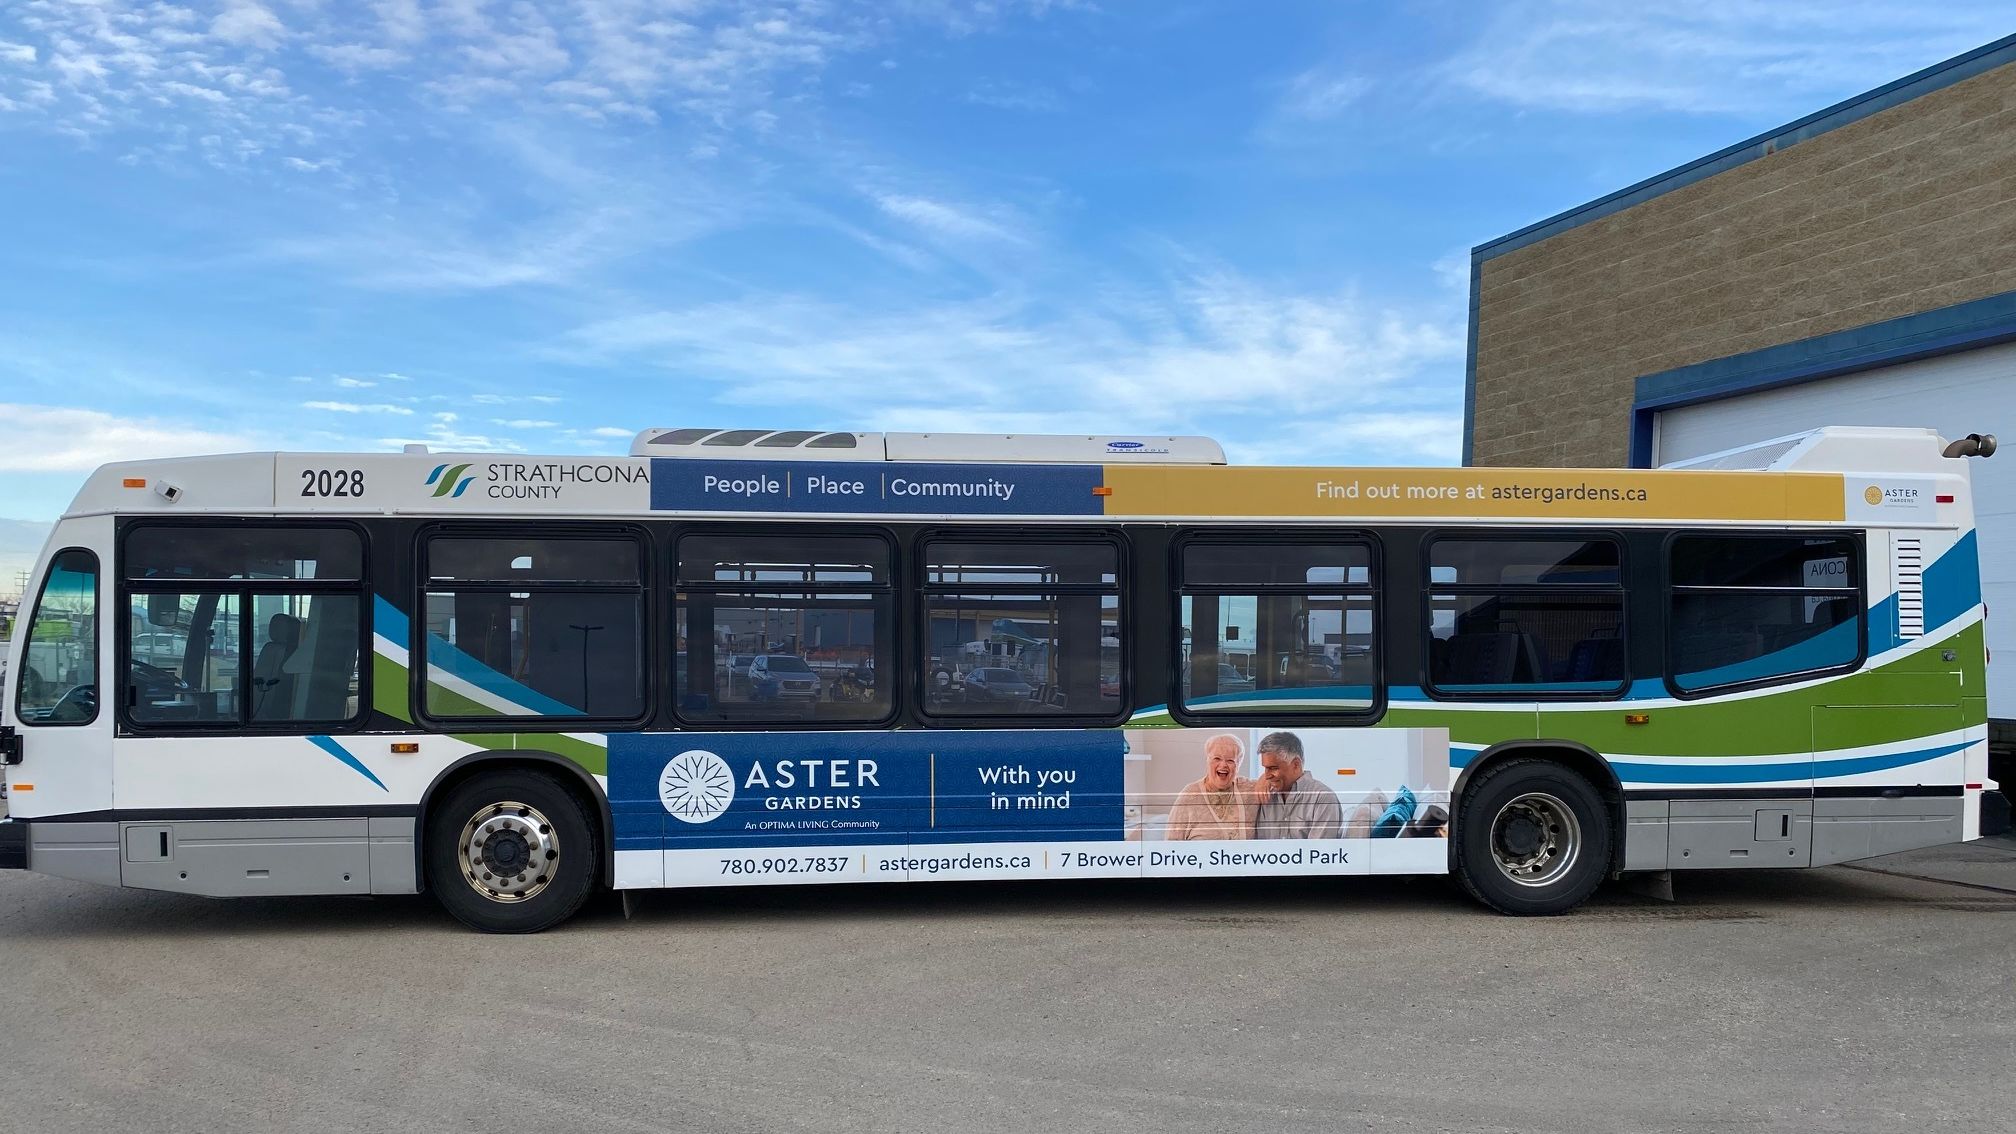 Special bus service for senior citizens at Aster Gardens